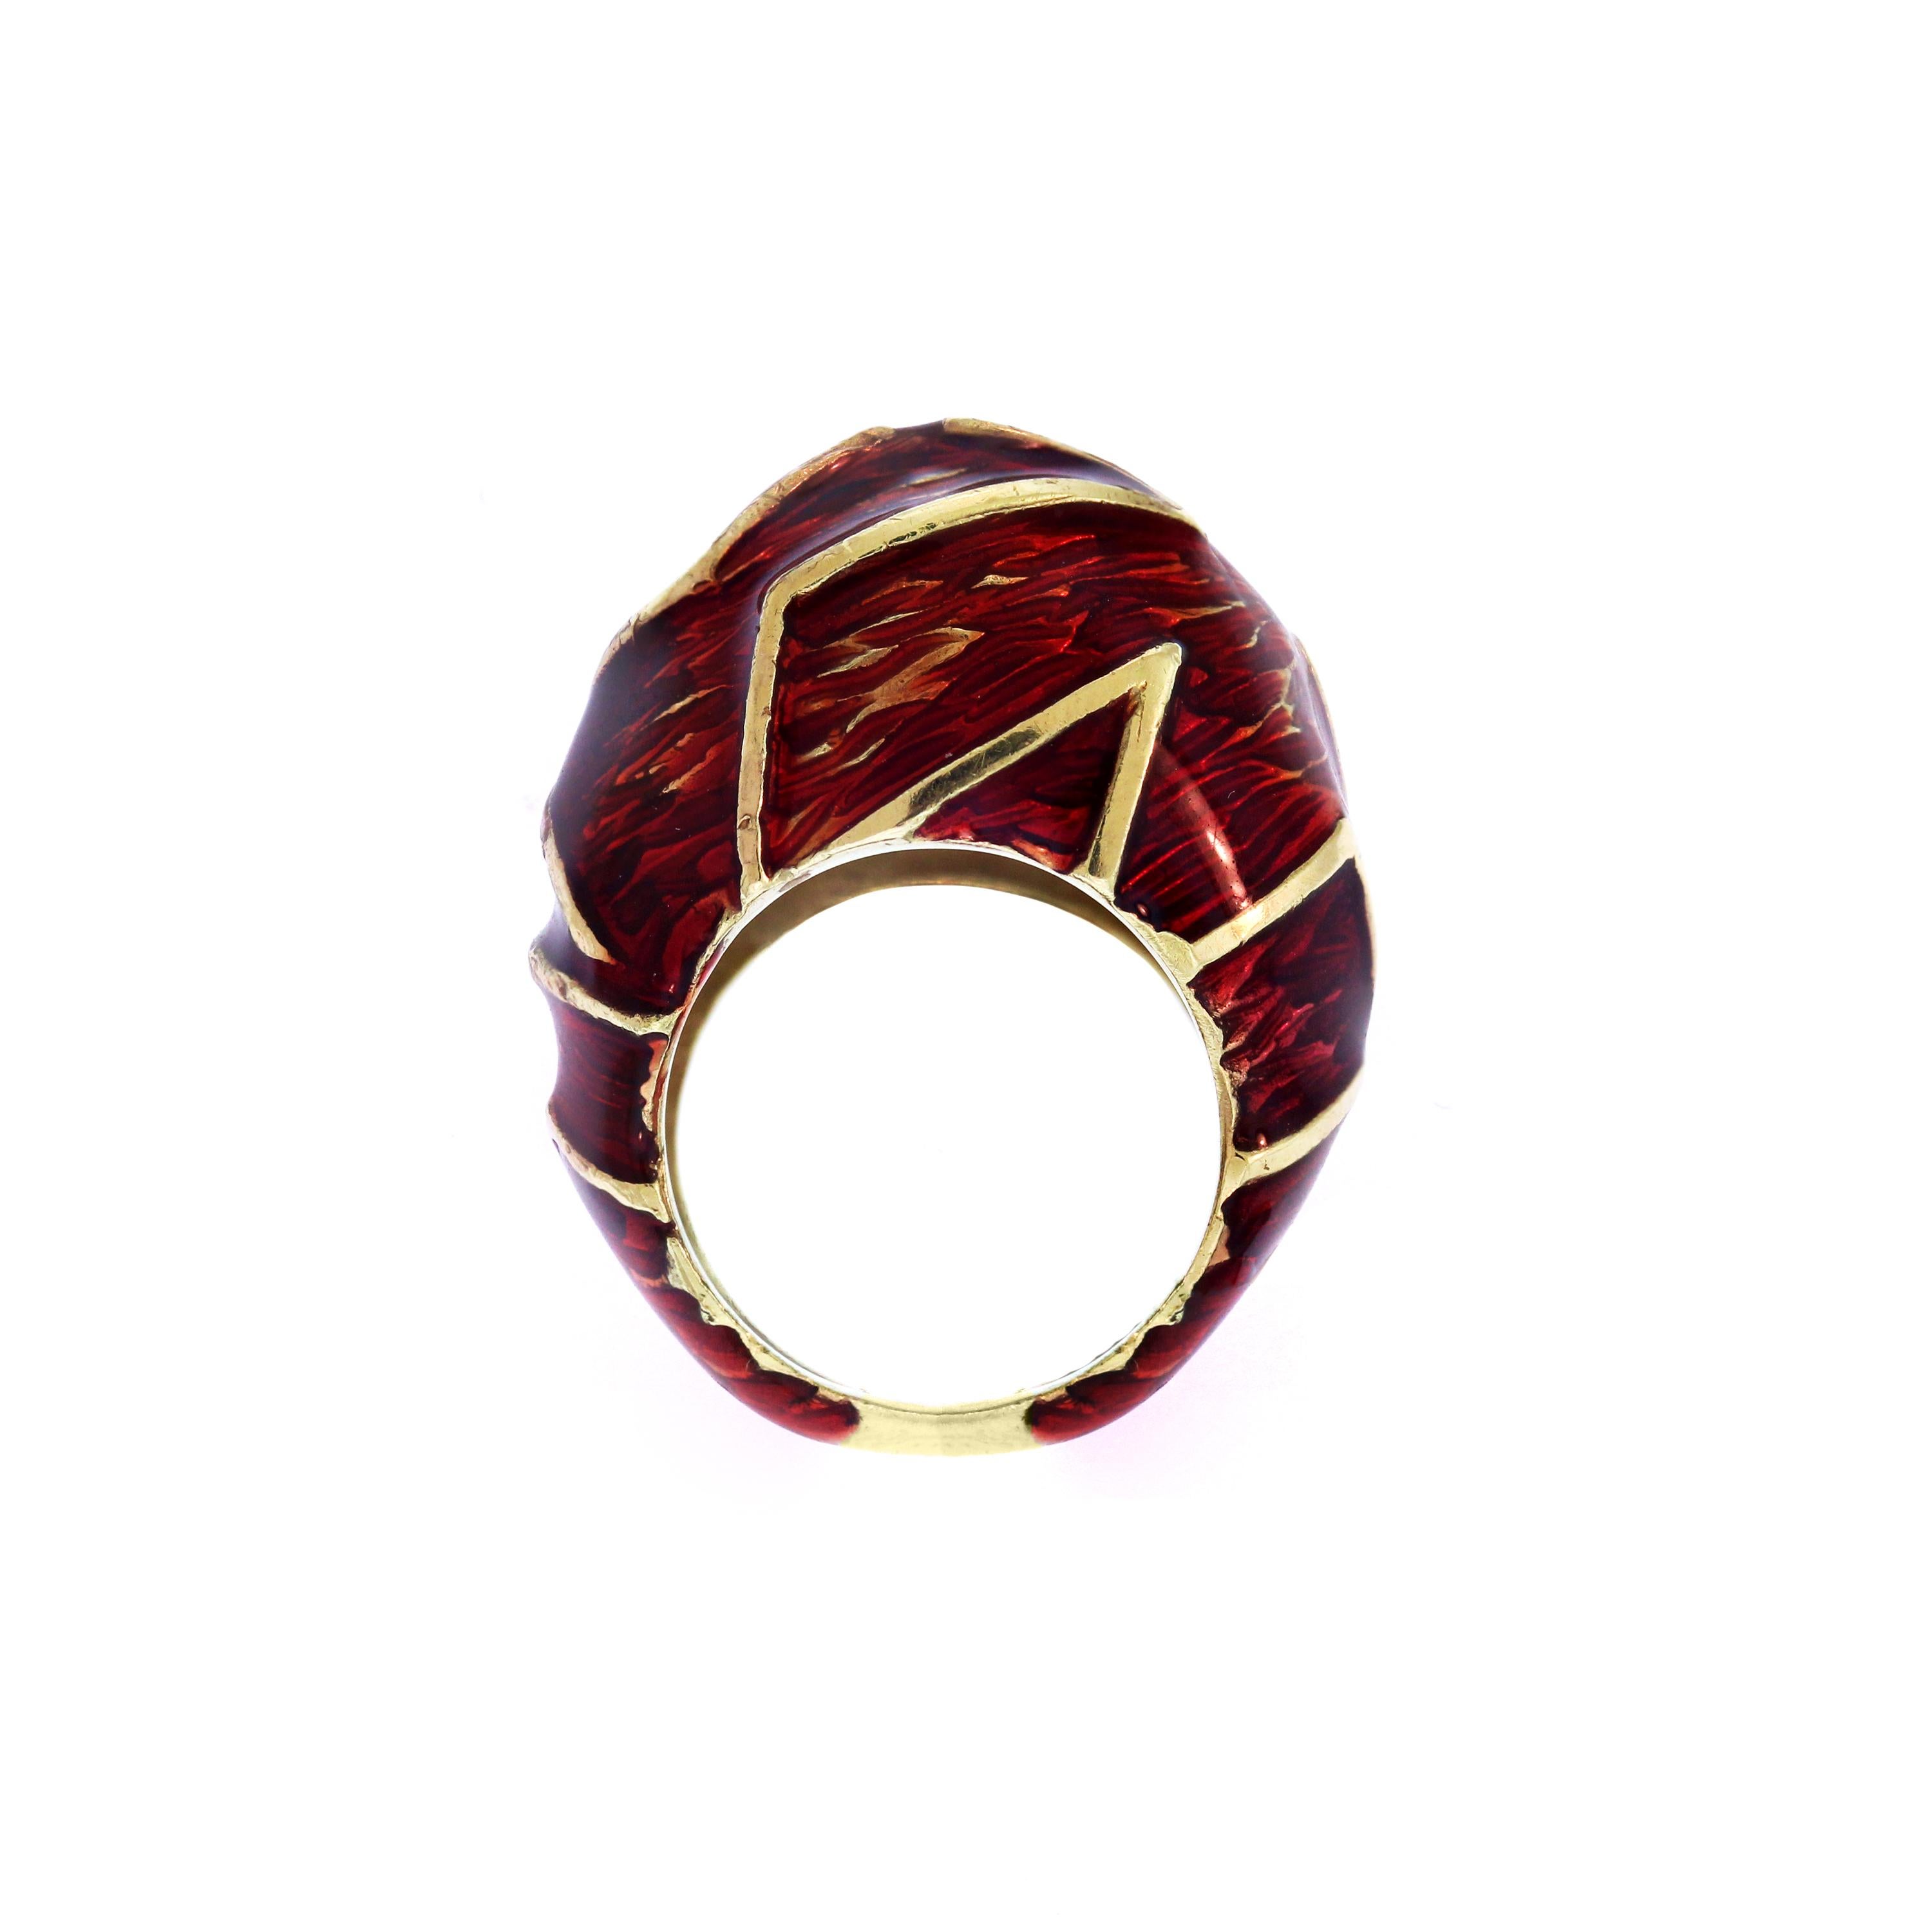 18K Yellow Gold Cocktail Ring with Red Enamel

Beautifully done Red Enamel all throughout the ring with beautiful texture

Ring face is 0.7 inch 
8mm band width

Ring size is 6.5. Sizable